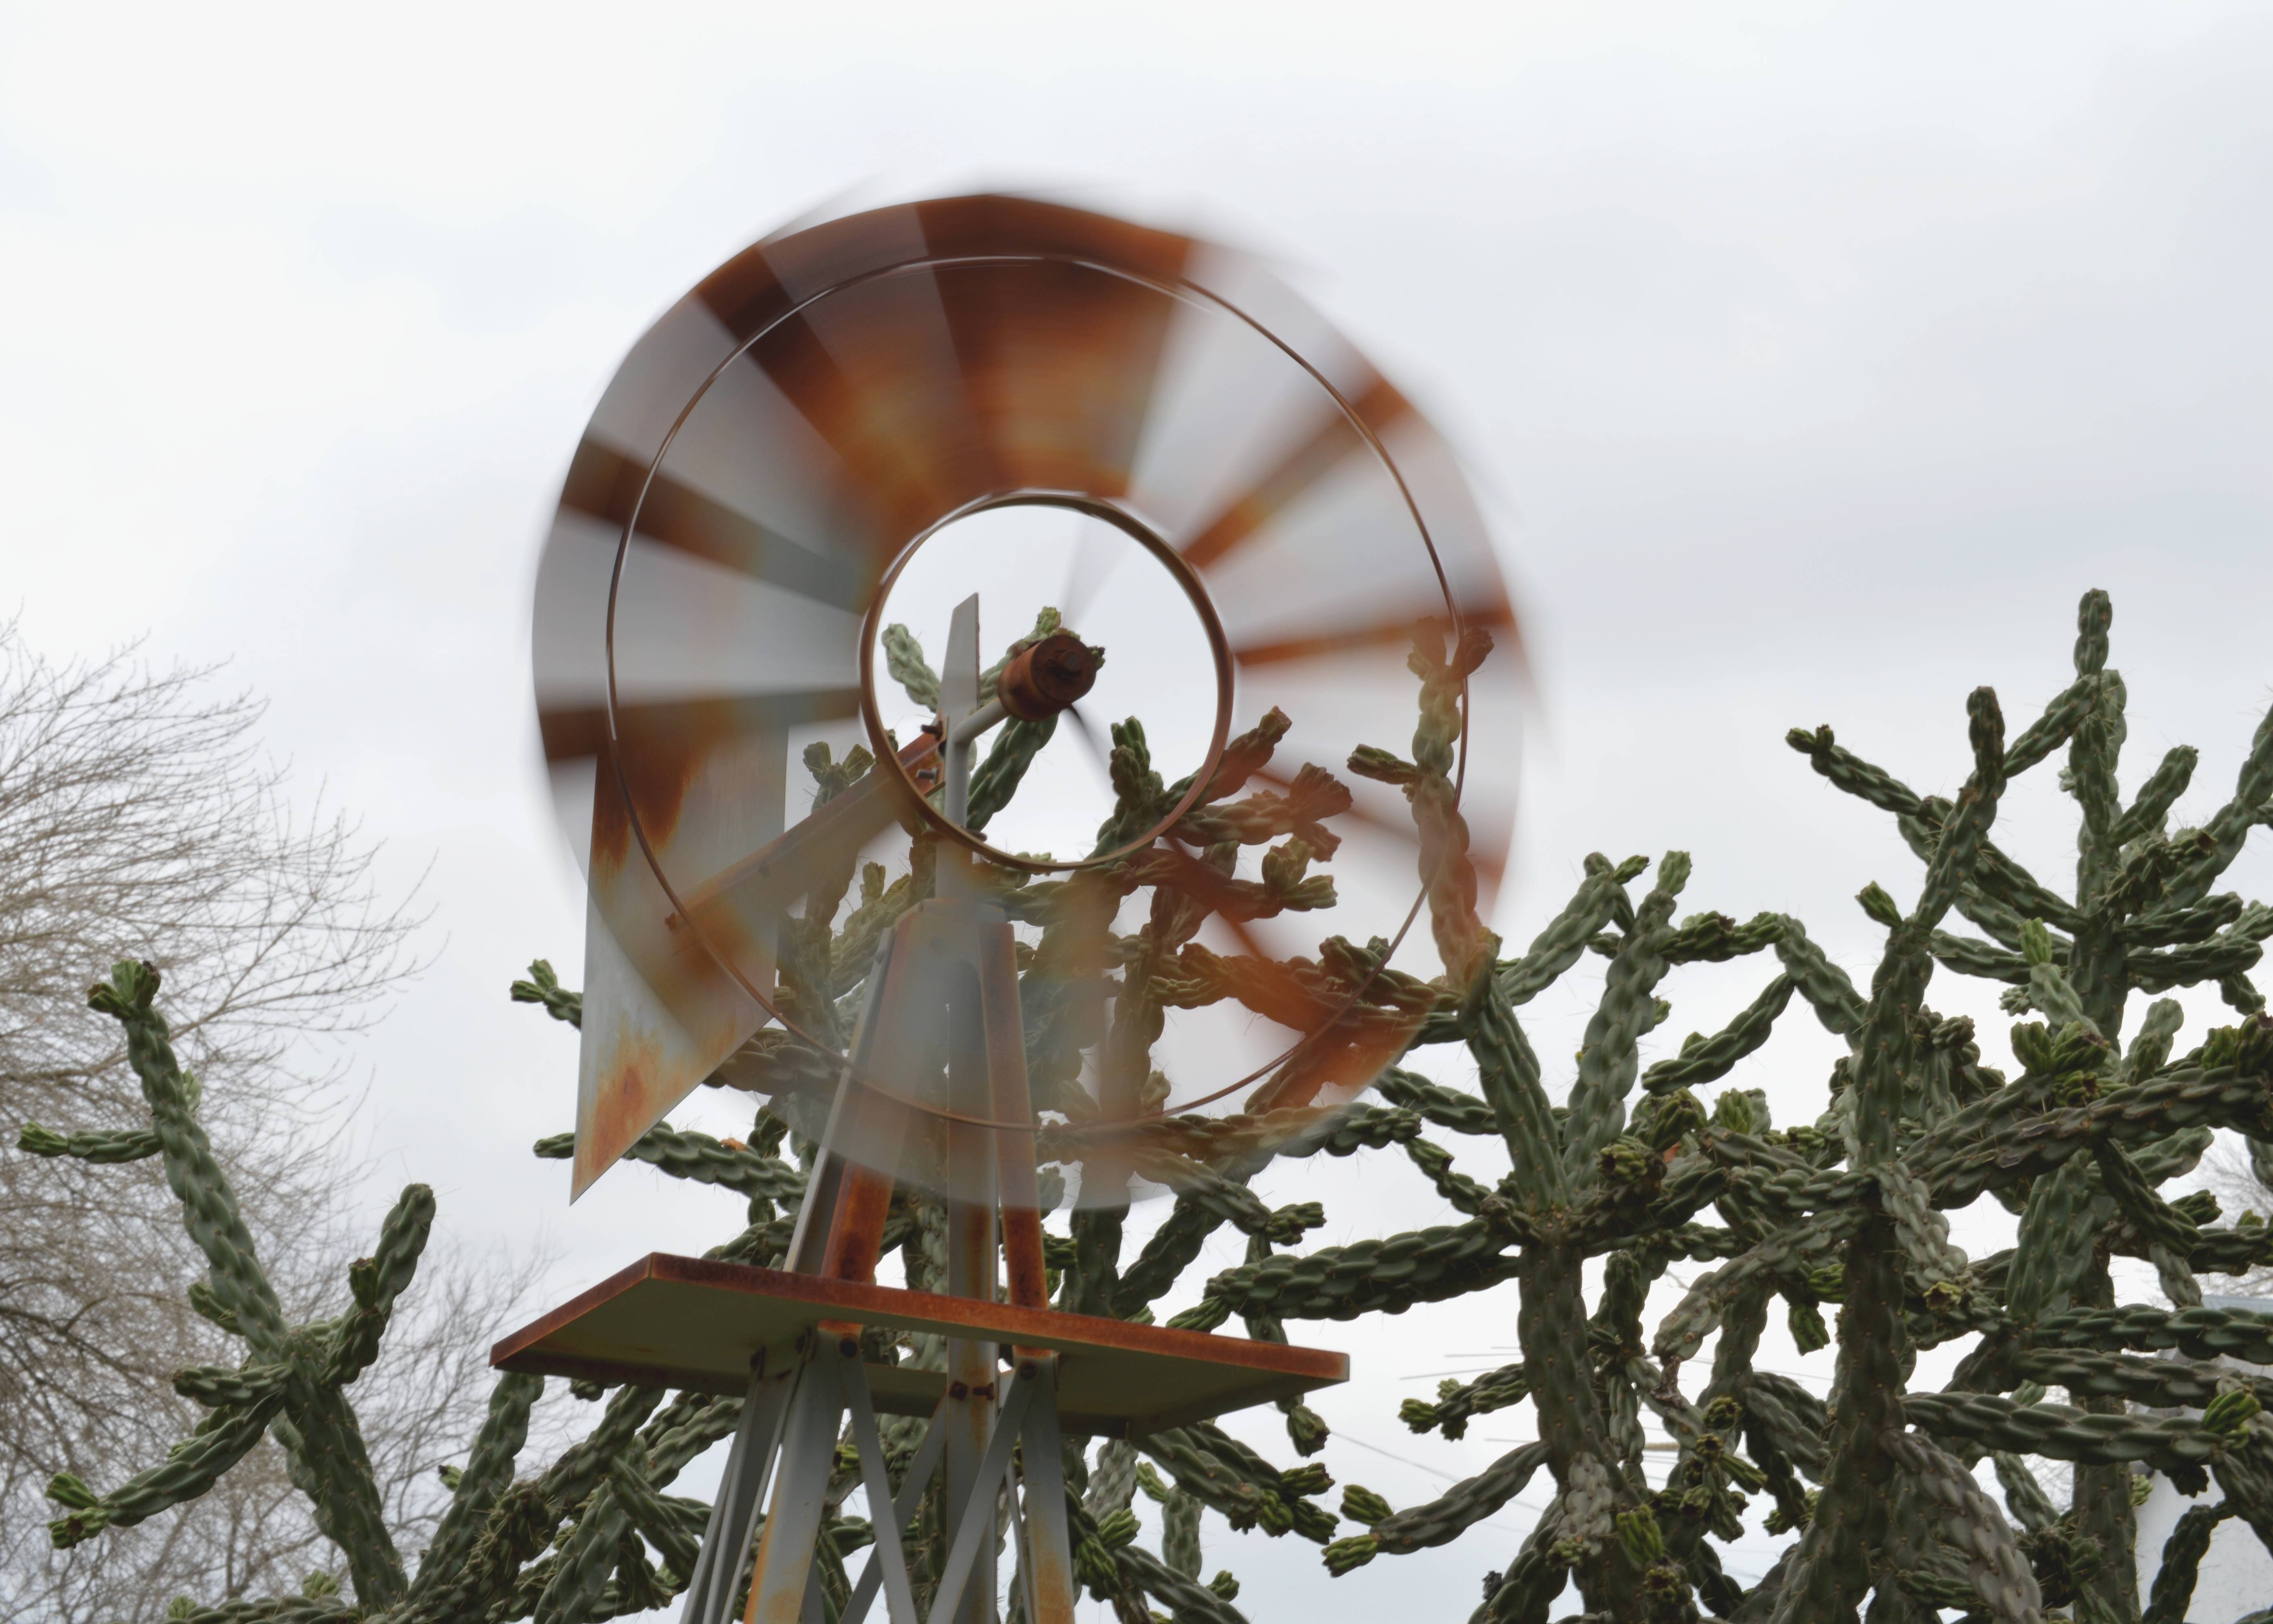 brown and white wind mill spinning